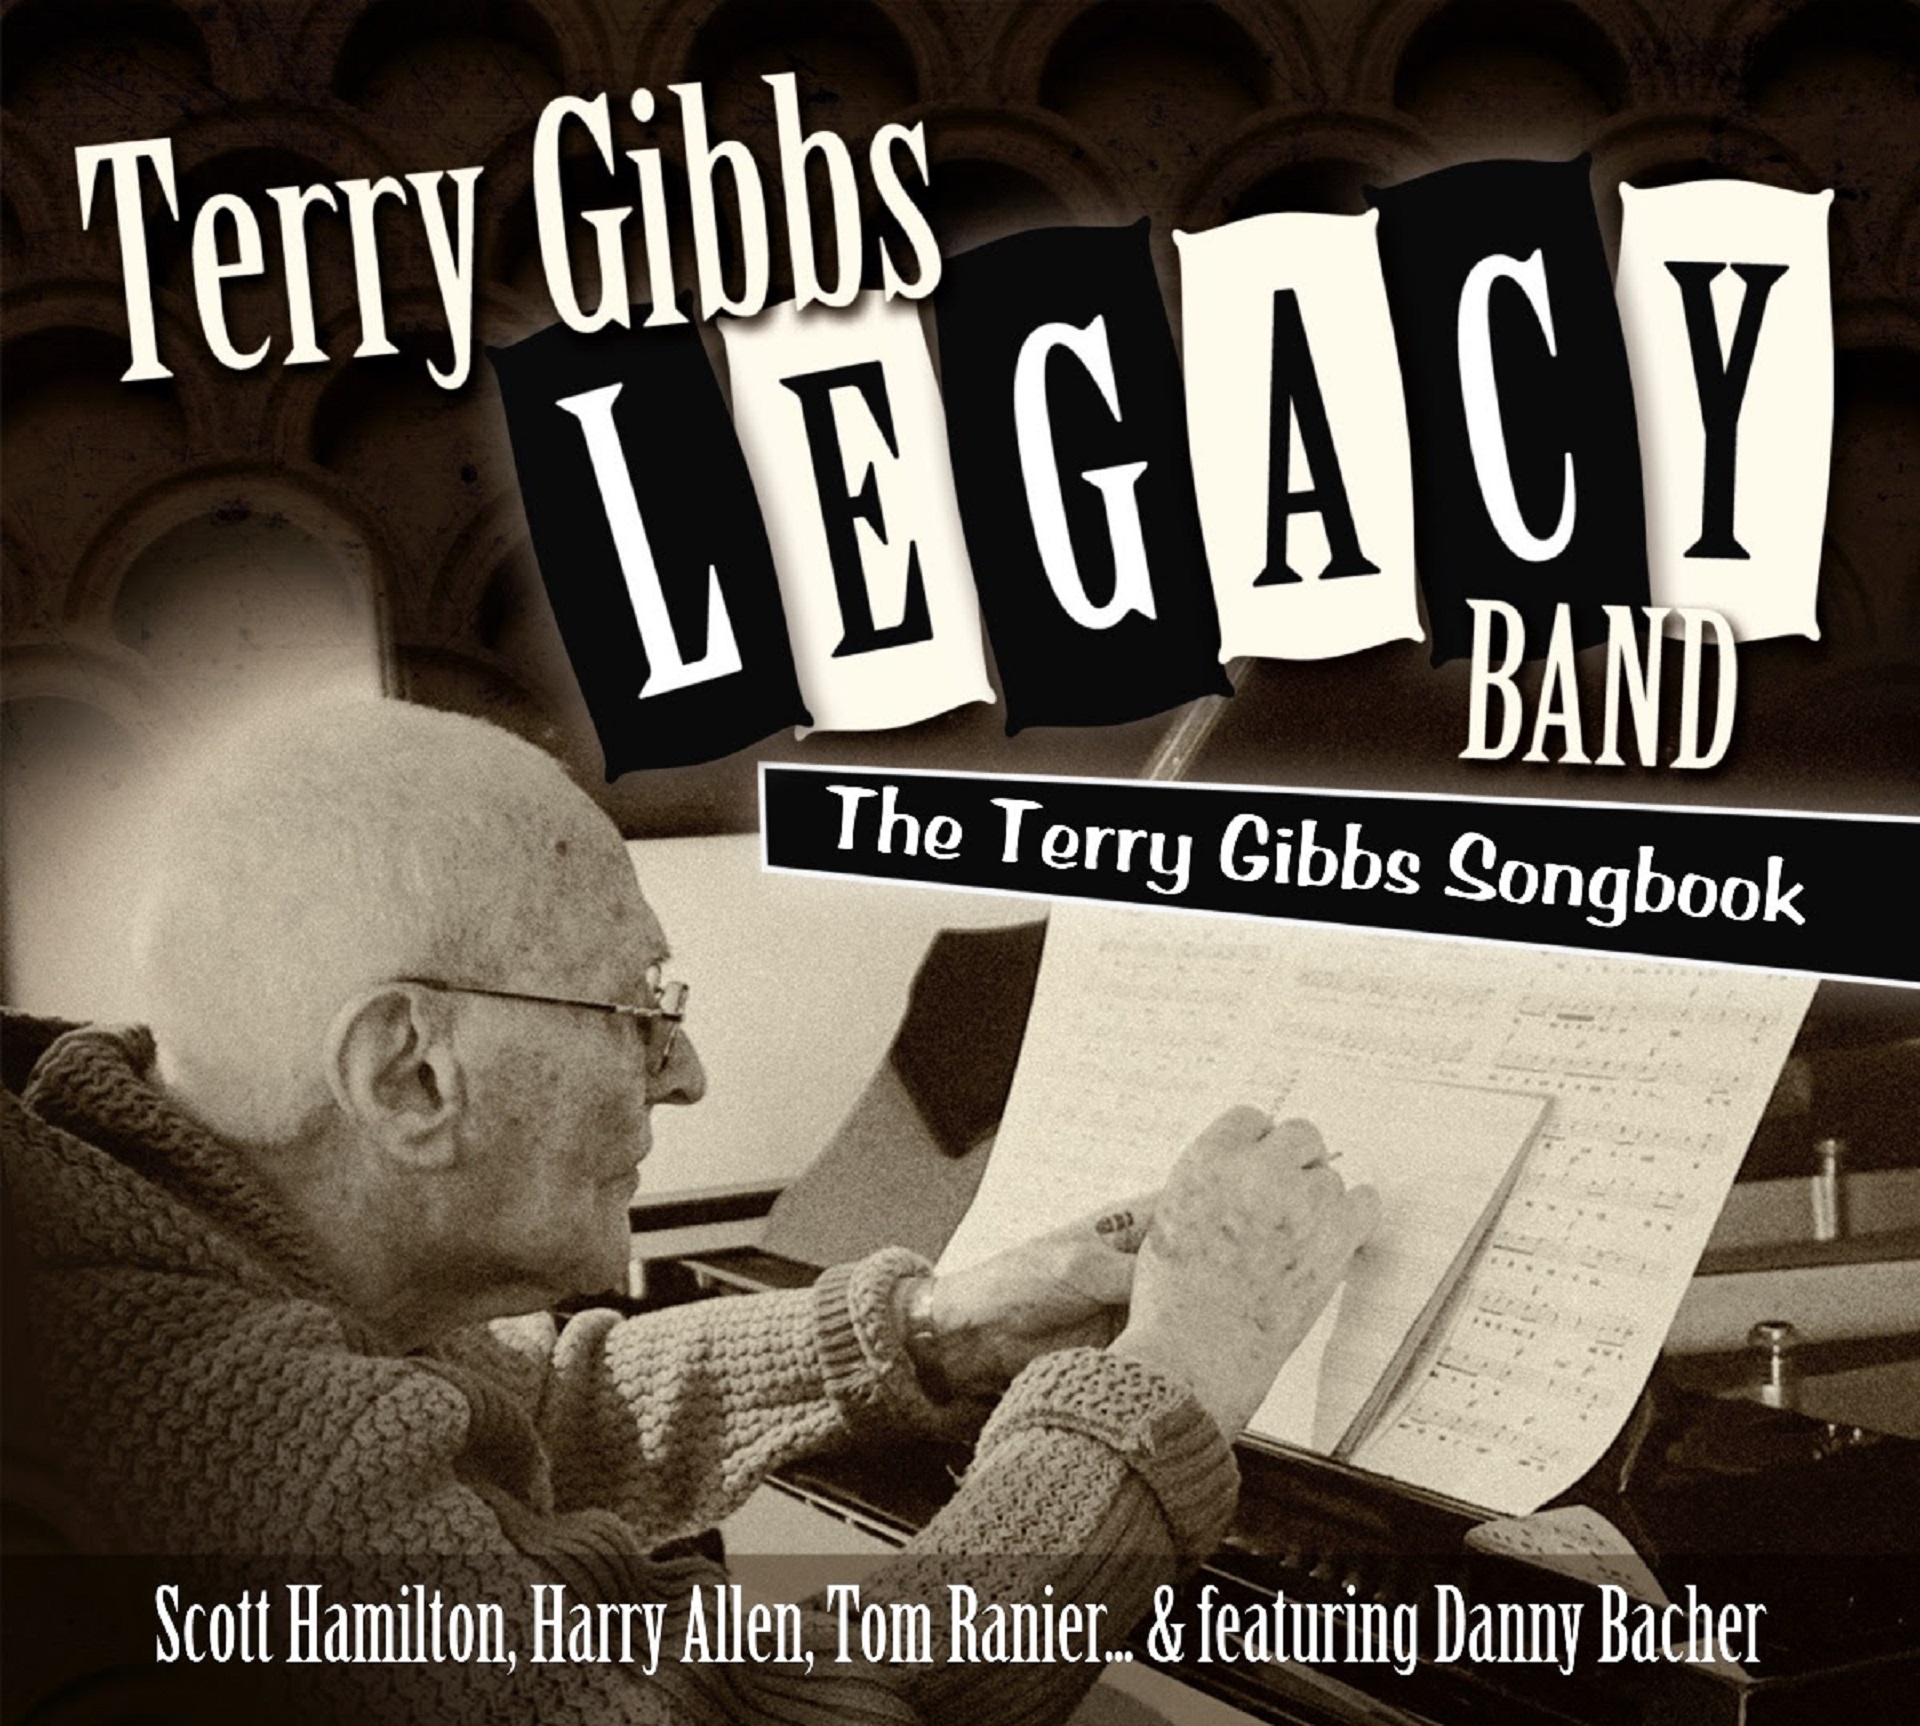 Turning 99, Legendary Musician Terry Gibbs to Release Highly Anticipated Album, "The Terry Gibbs Songbook”